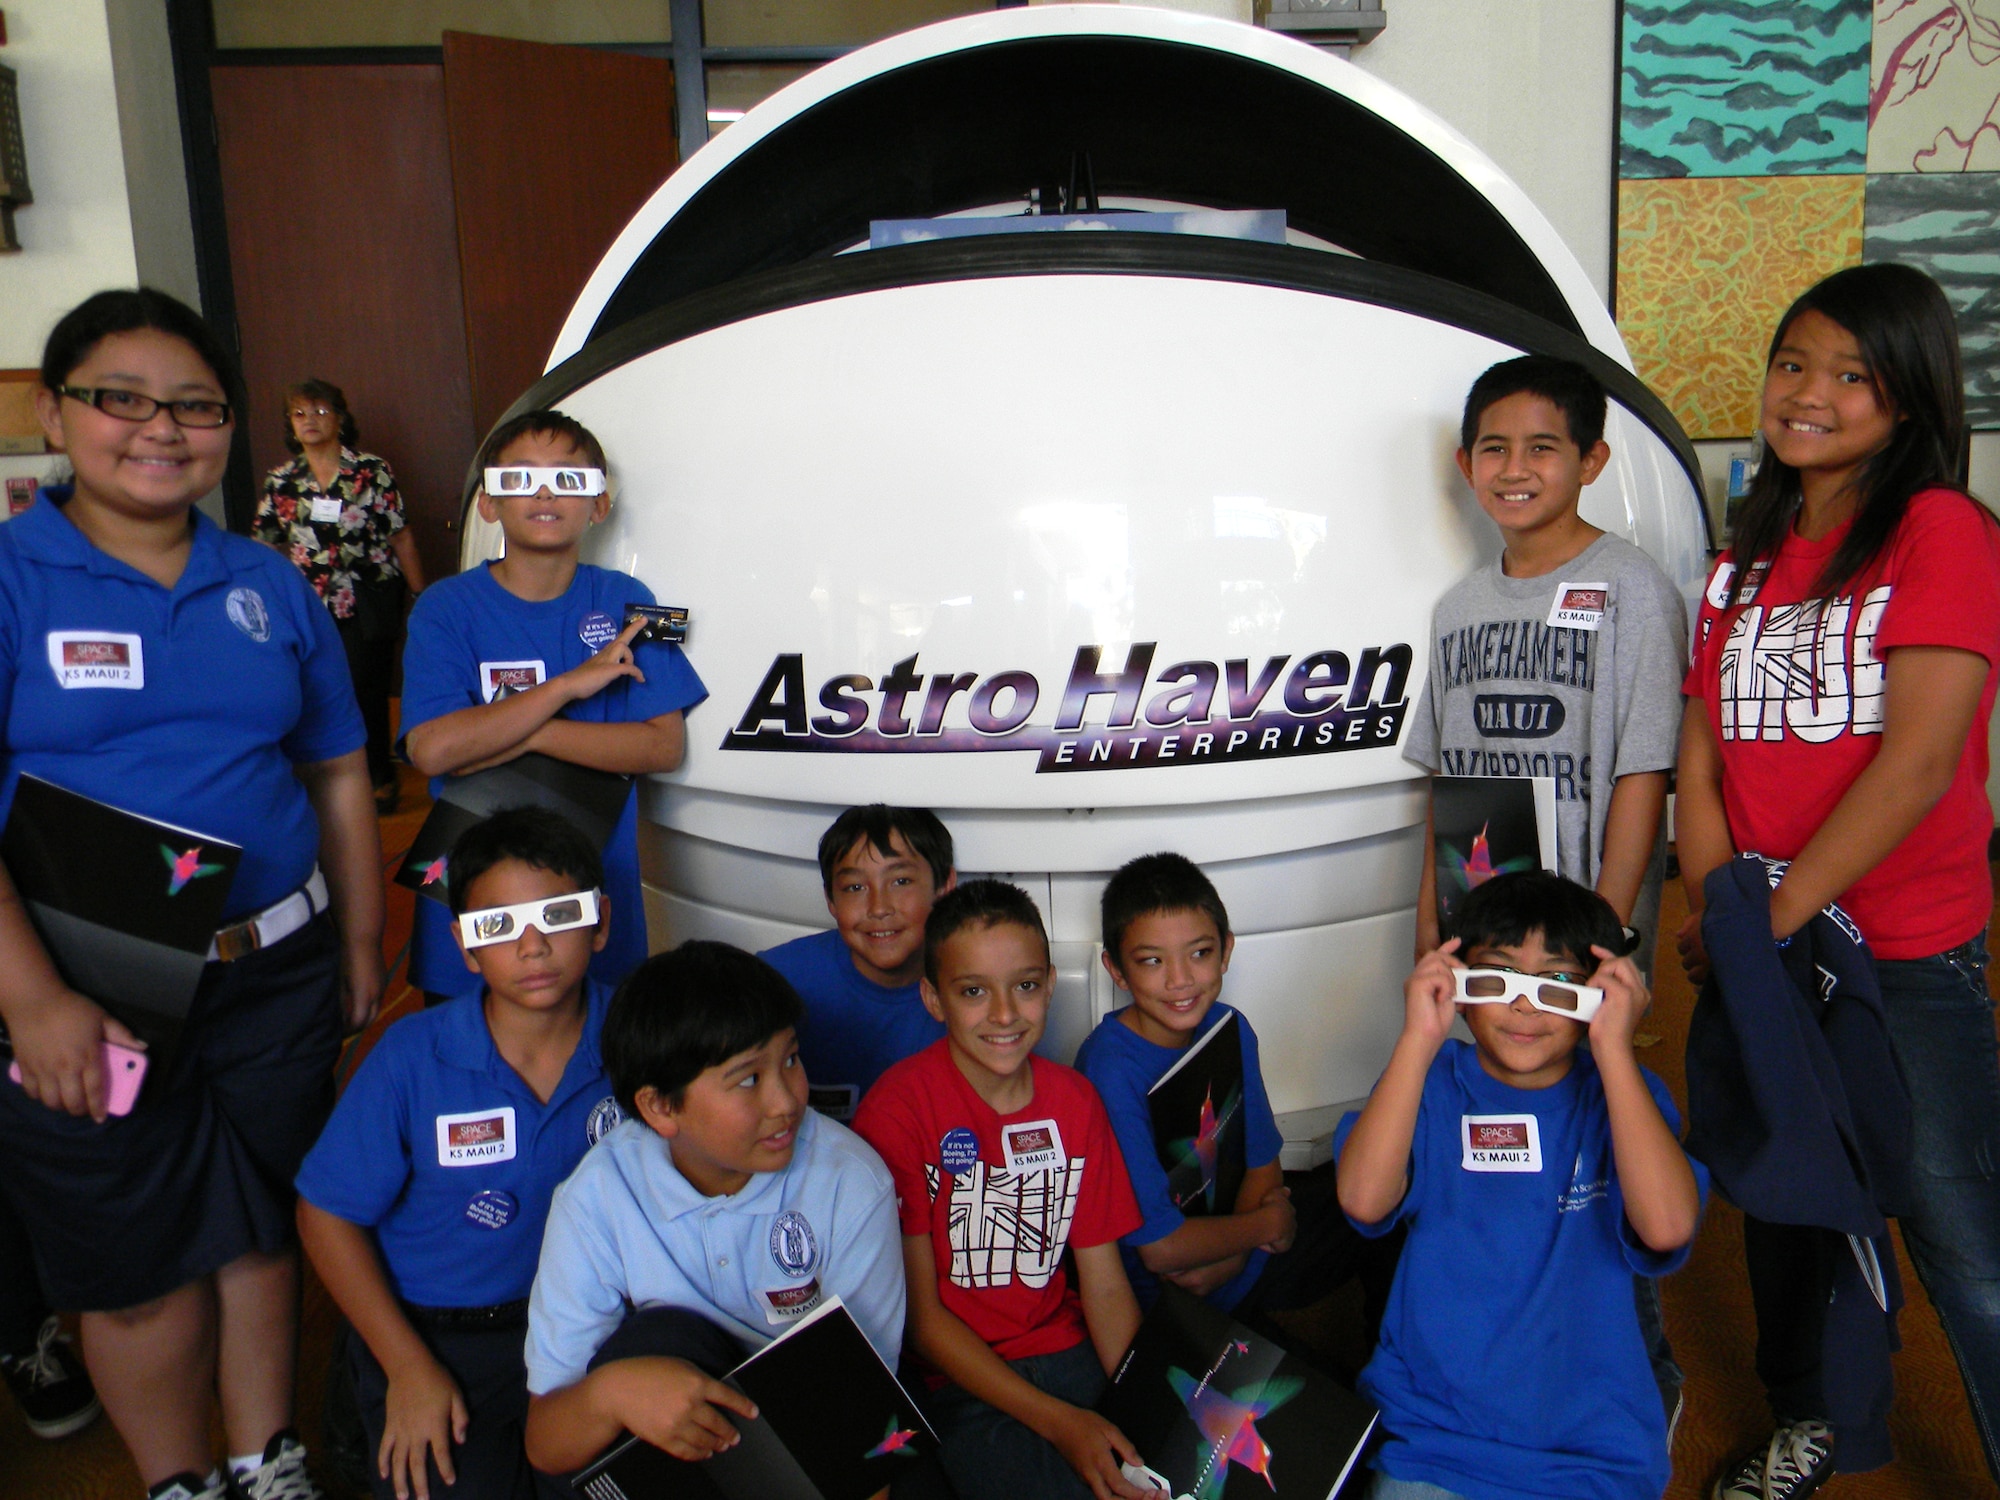 Maui students in front of the remote telescope dome cover donated by AstroHaven. The remote telescope will be used live in classrooms across the United States and Hawaii. (Photo courtesy Maui Economic Development Board)